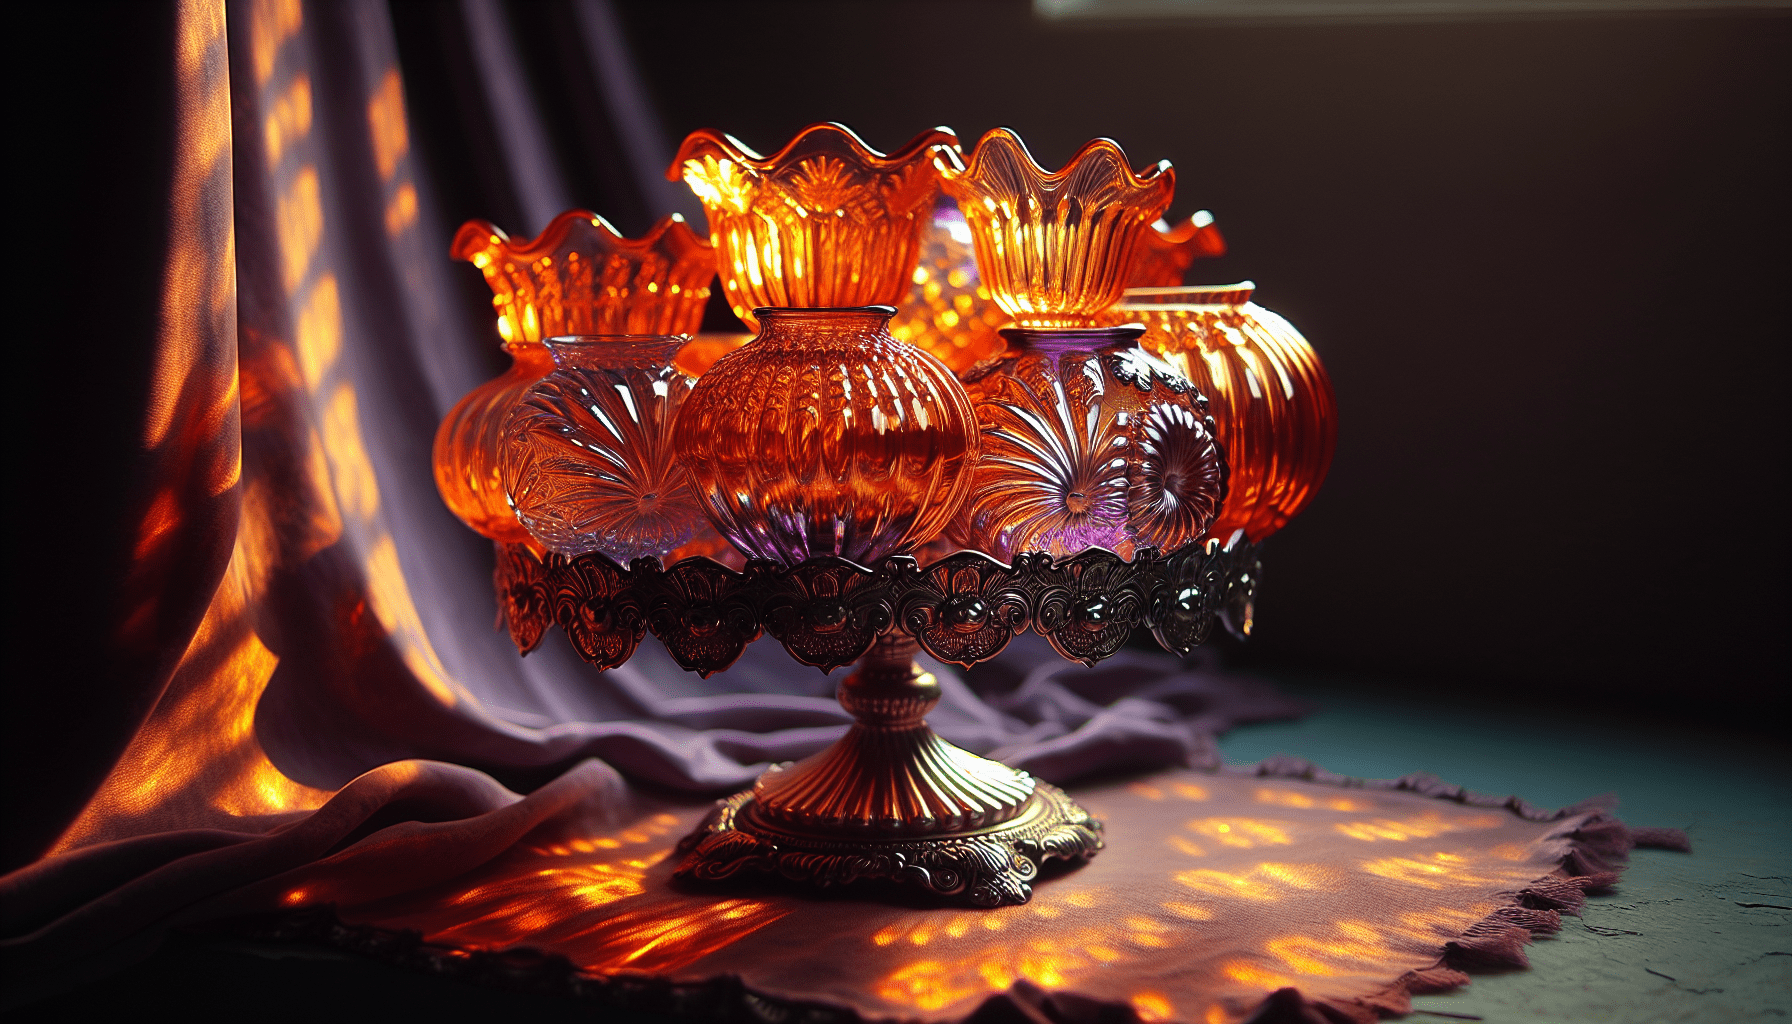 Arrangement of orange carnival glass on a decorative stand